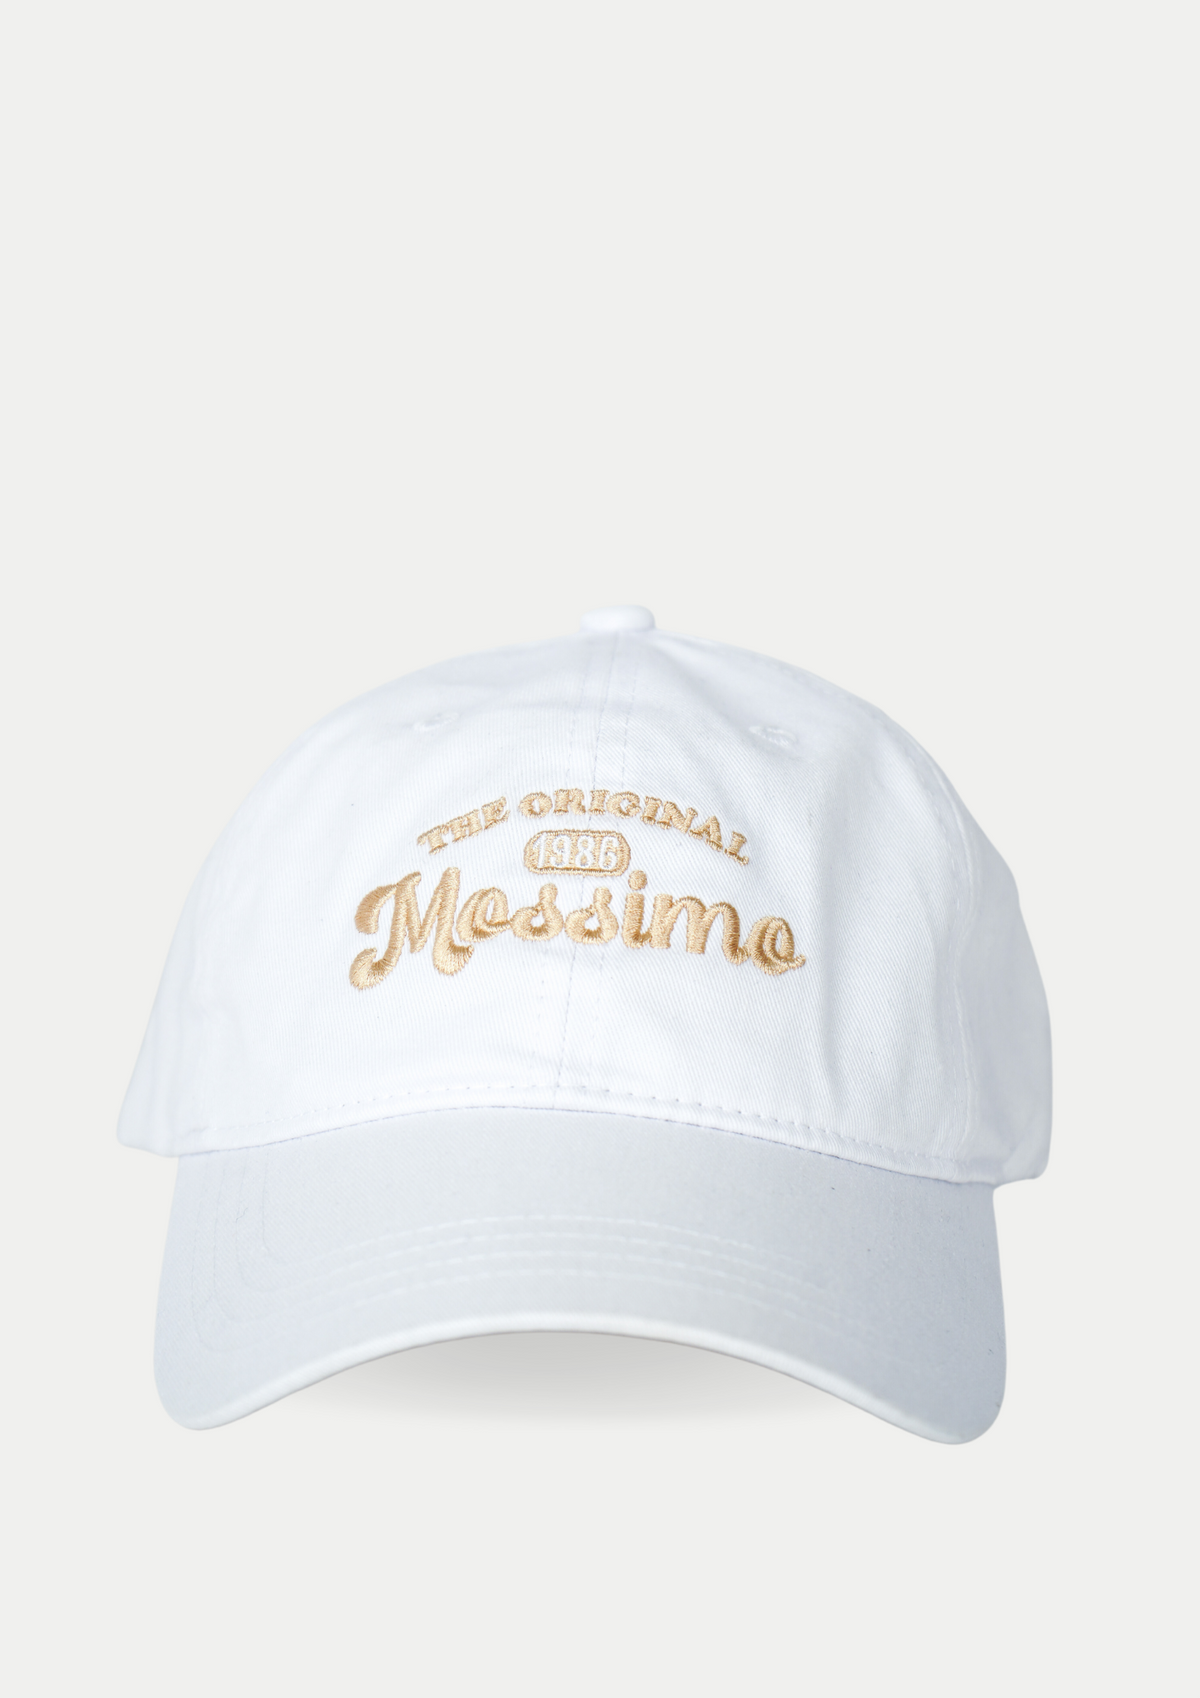 Mossimo White Baseball Cap with Embroidery